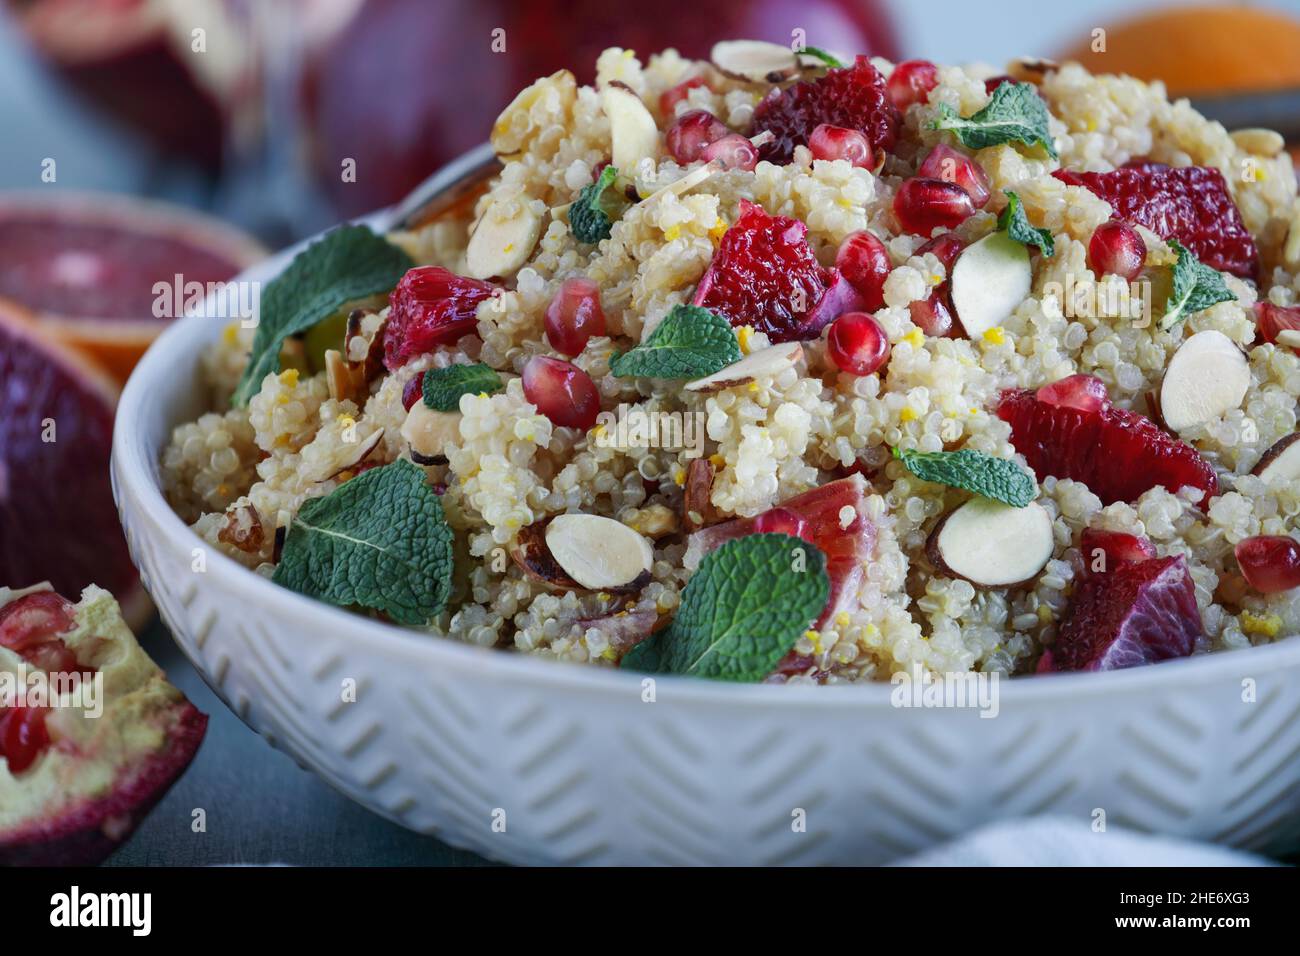 A healthy lunch or dinner of a vegan / vegetarian Moroccan quinoa salad with mint, pomegranate and blood oranges. Selective focus with blurred foregro Stock Photo